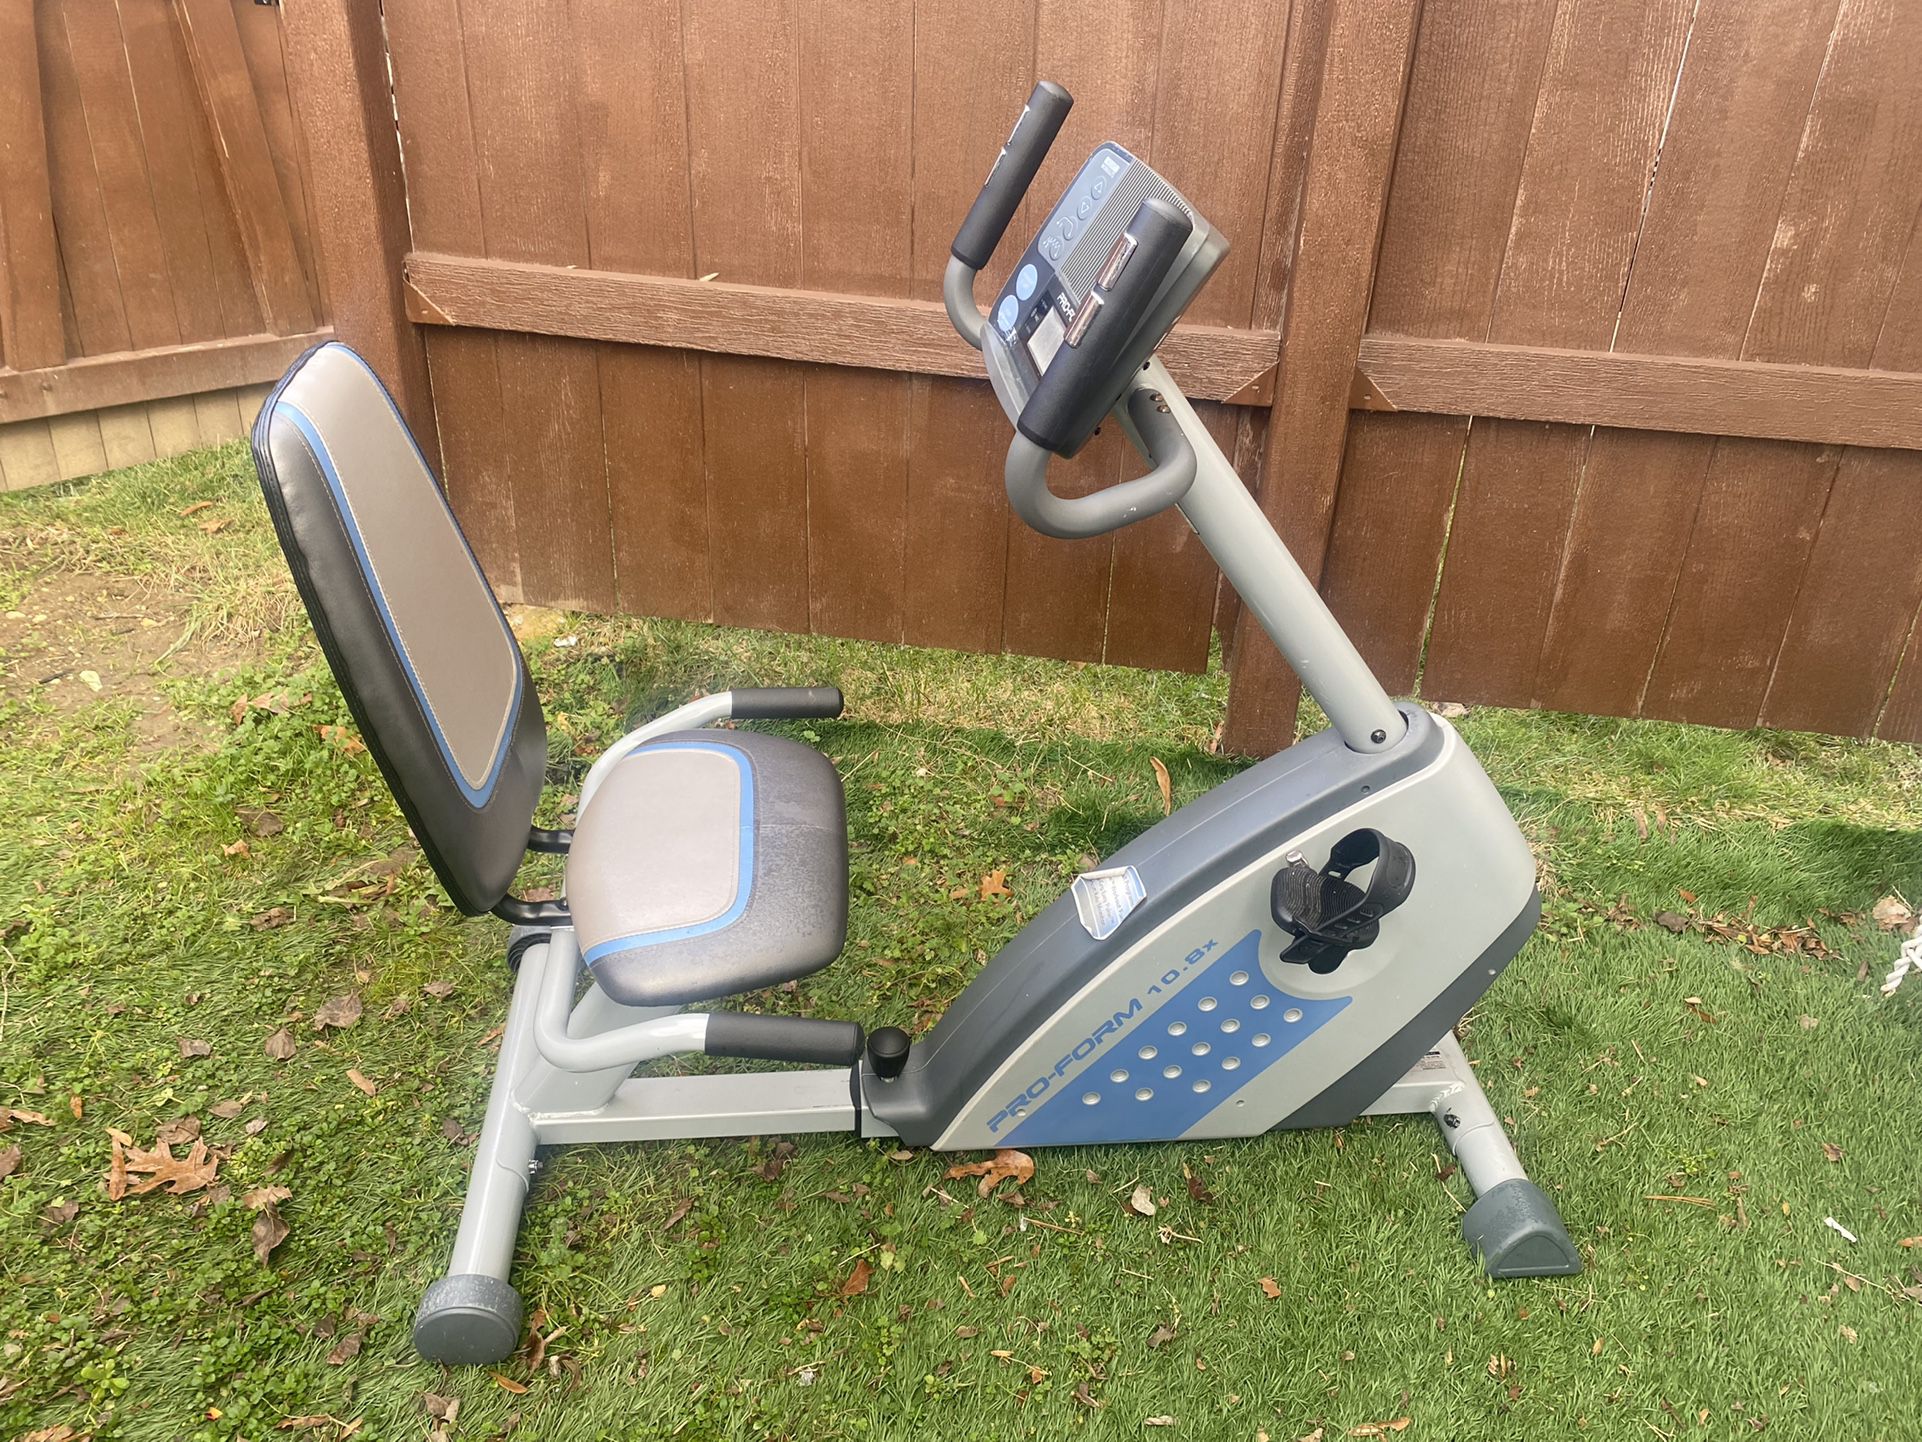 Exercise Bike   Works But Screen Doesn’t  